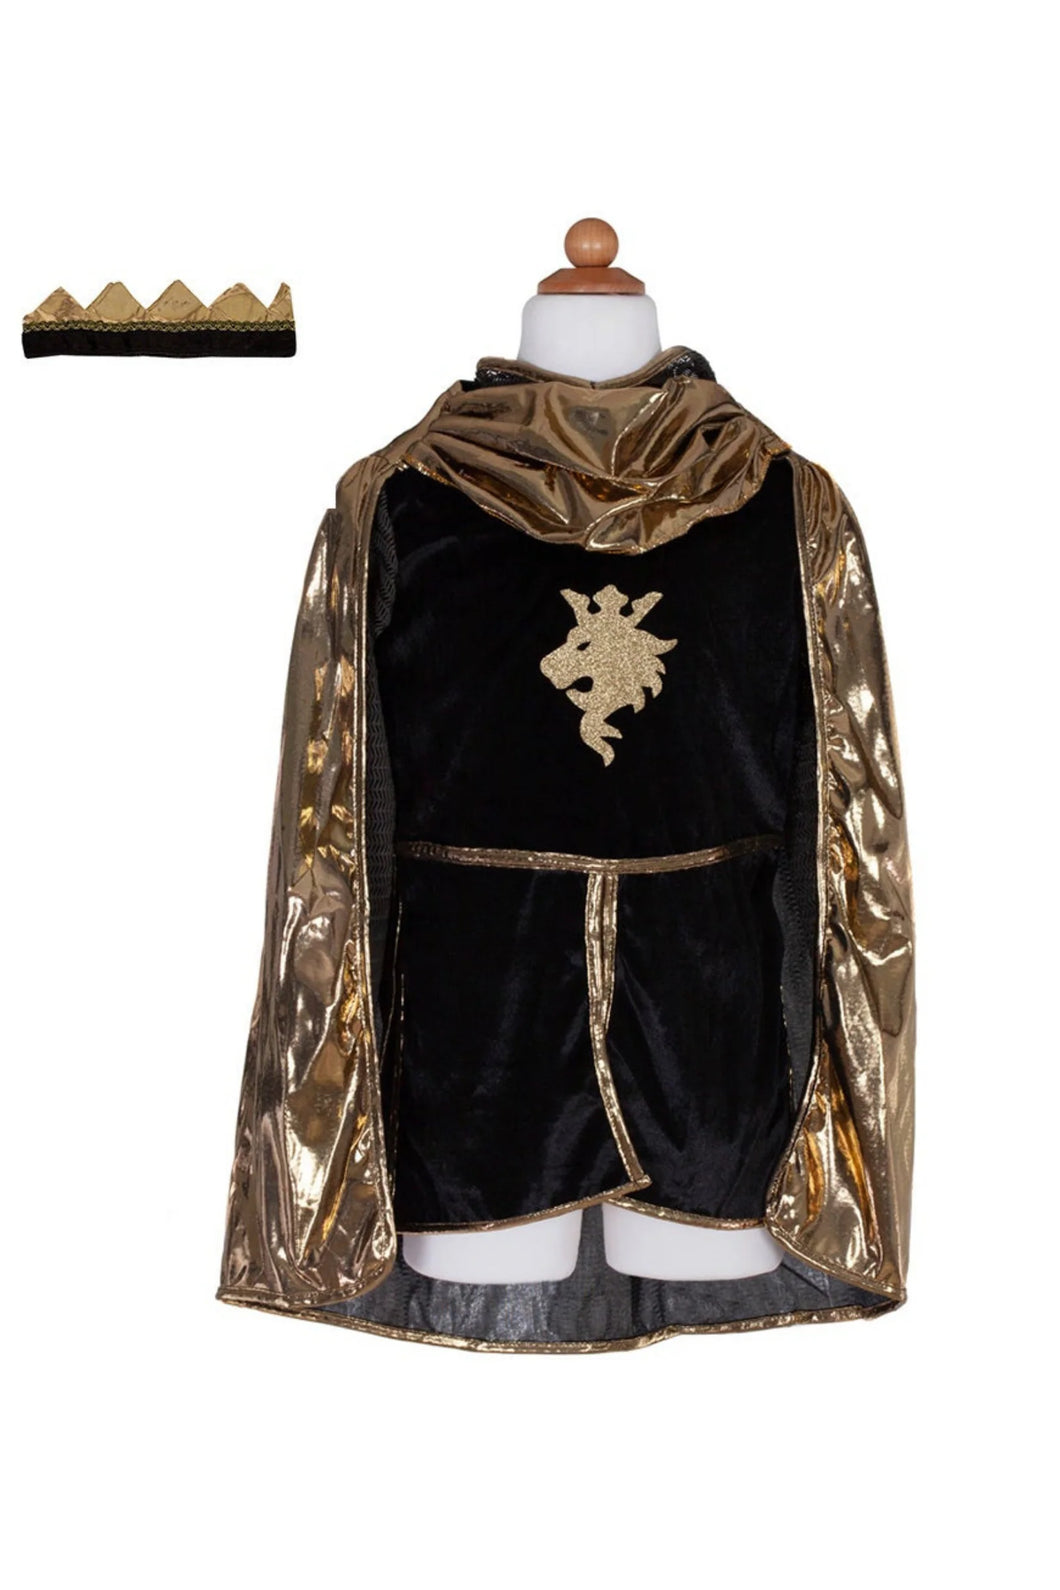 Great Pretenders Gold Knight Set With Tunic, Cape, & Crown